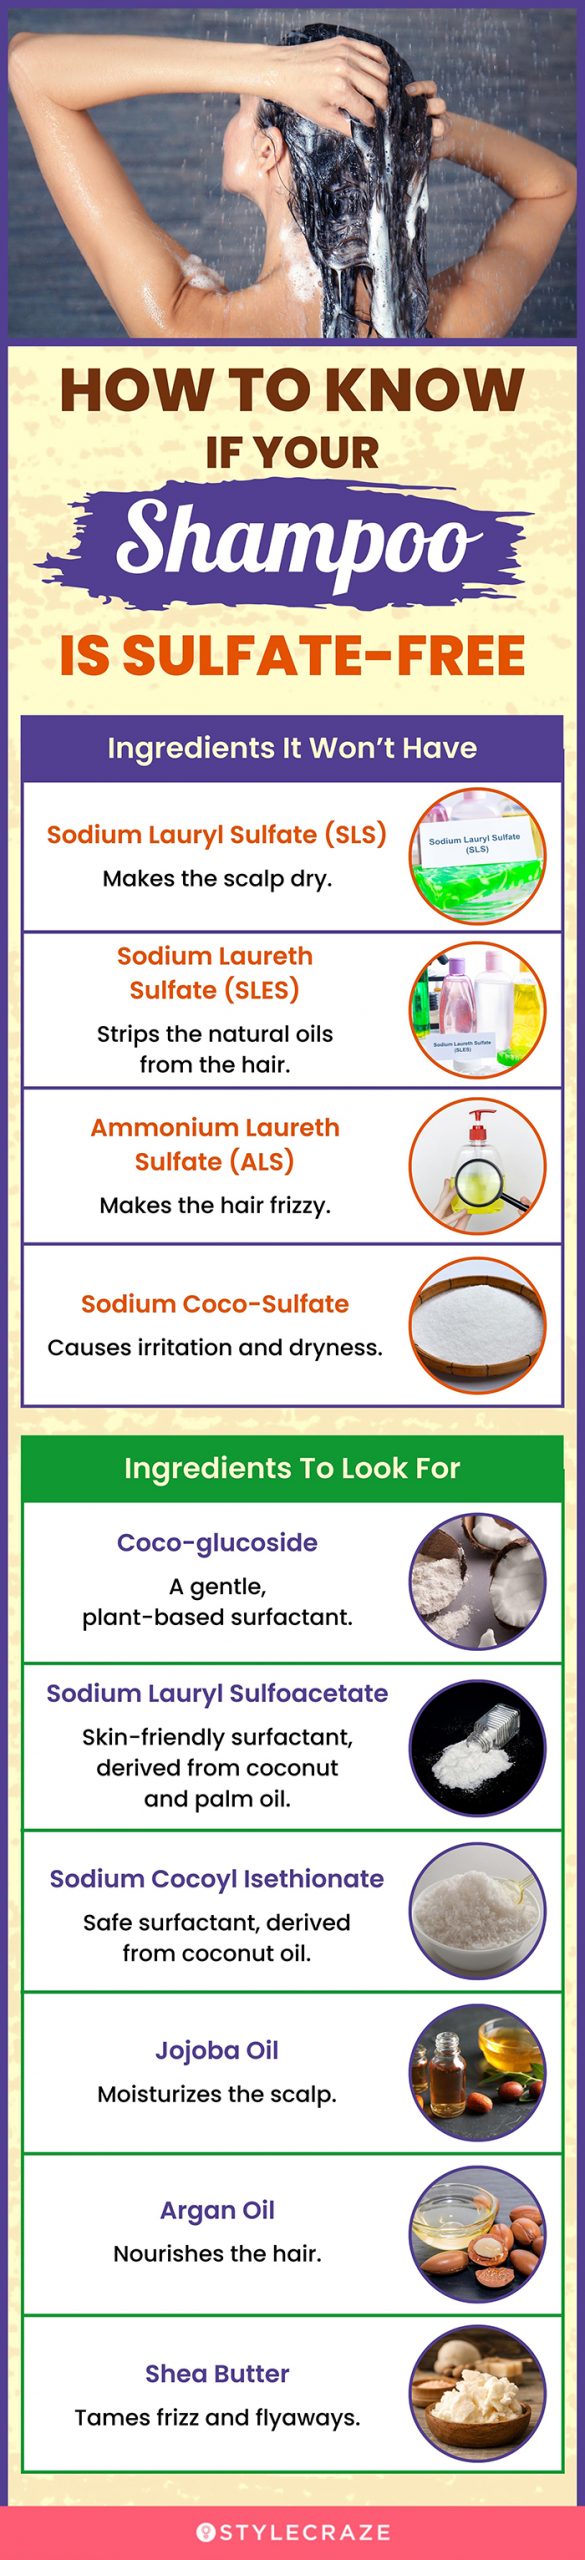 How To Know If Your Shampoo Is Sulfate-Free (infographic)